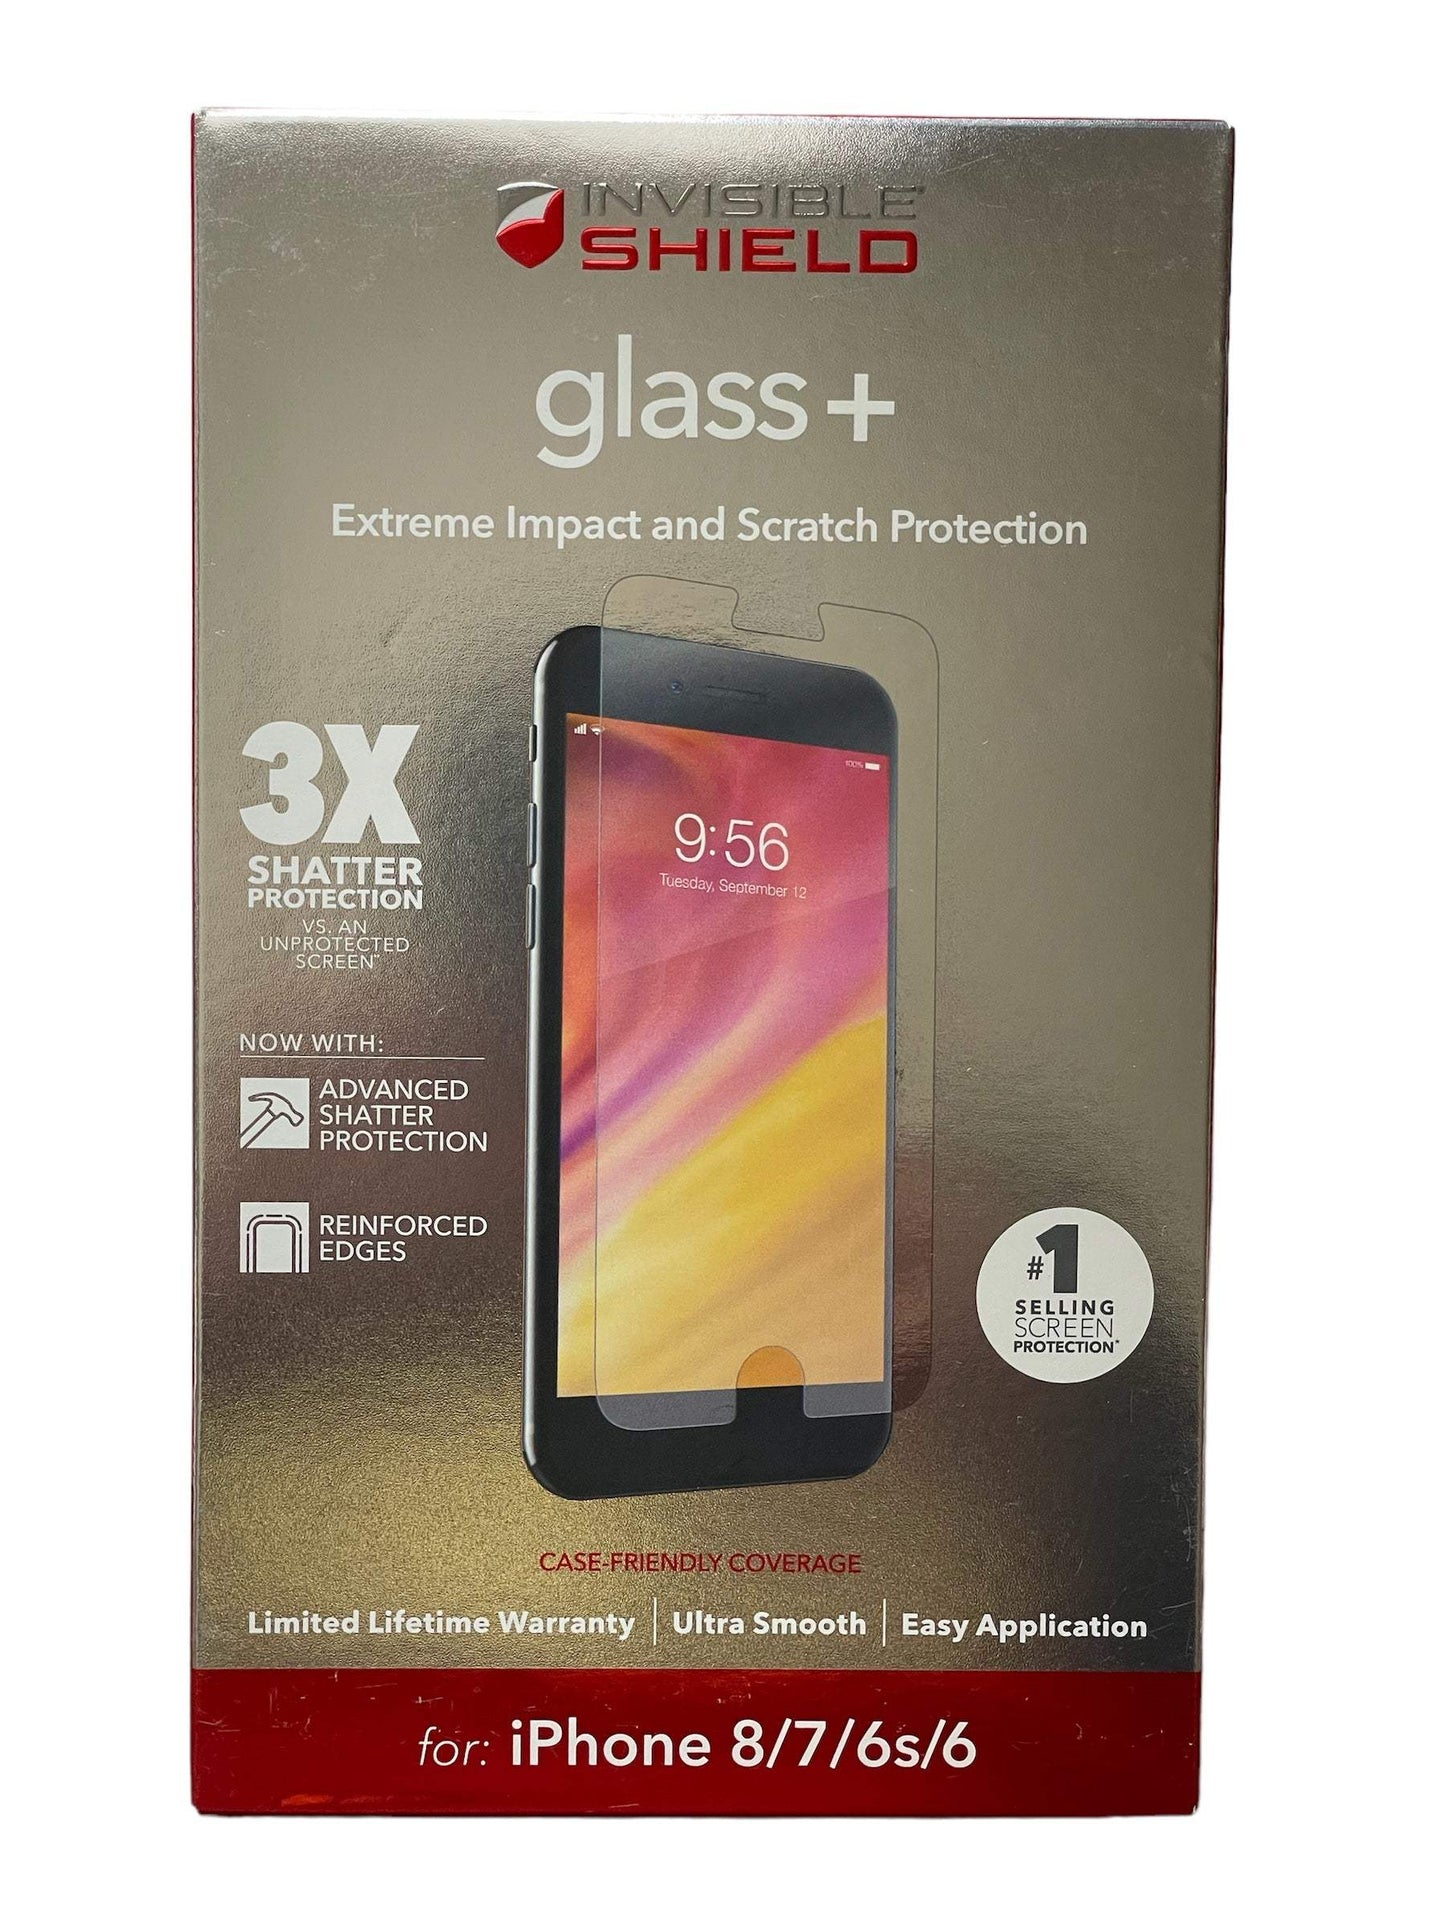 ZAGG Invisible Shield Glass+Extreme Impact & Scratch Protection iPhone 8/7/6s/6 - Selzalot